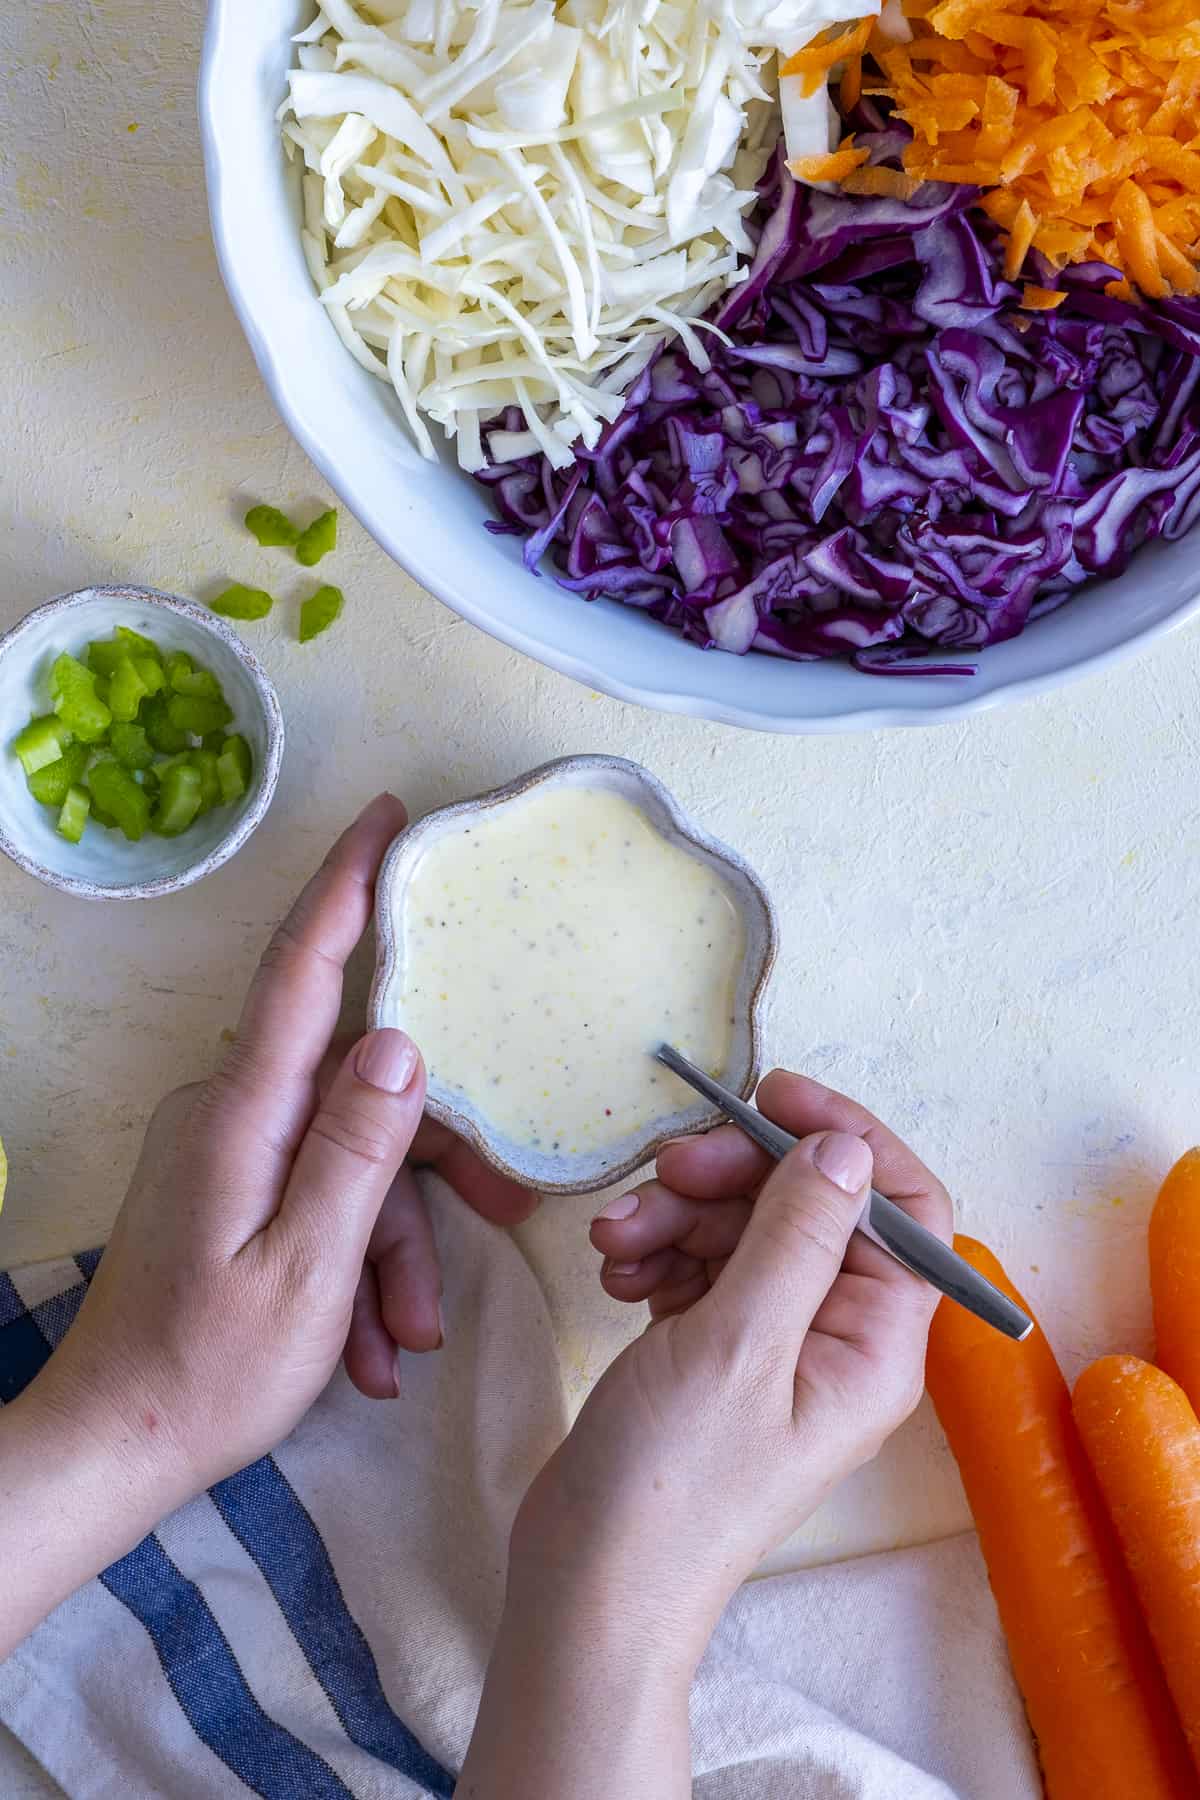 Hands mixing yogurt coleslaw dressing and coleslaw mixture in a bowl on the side.